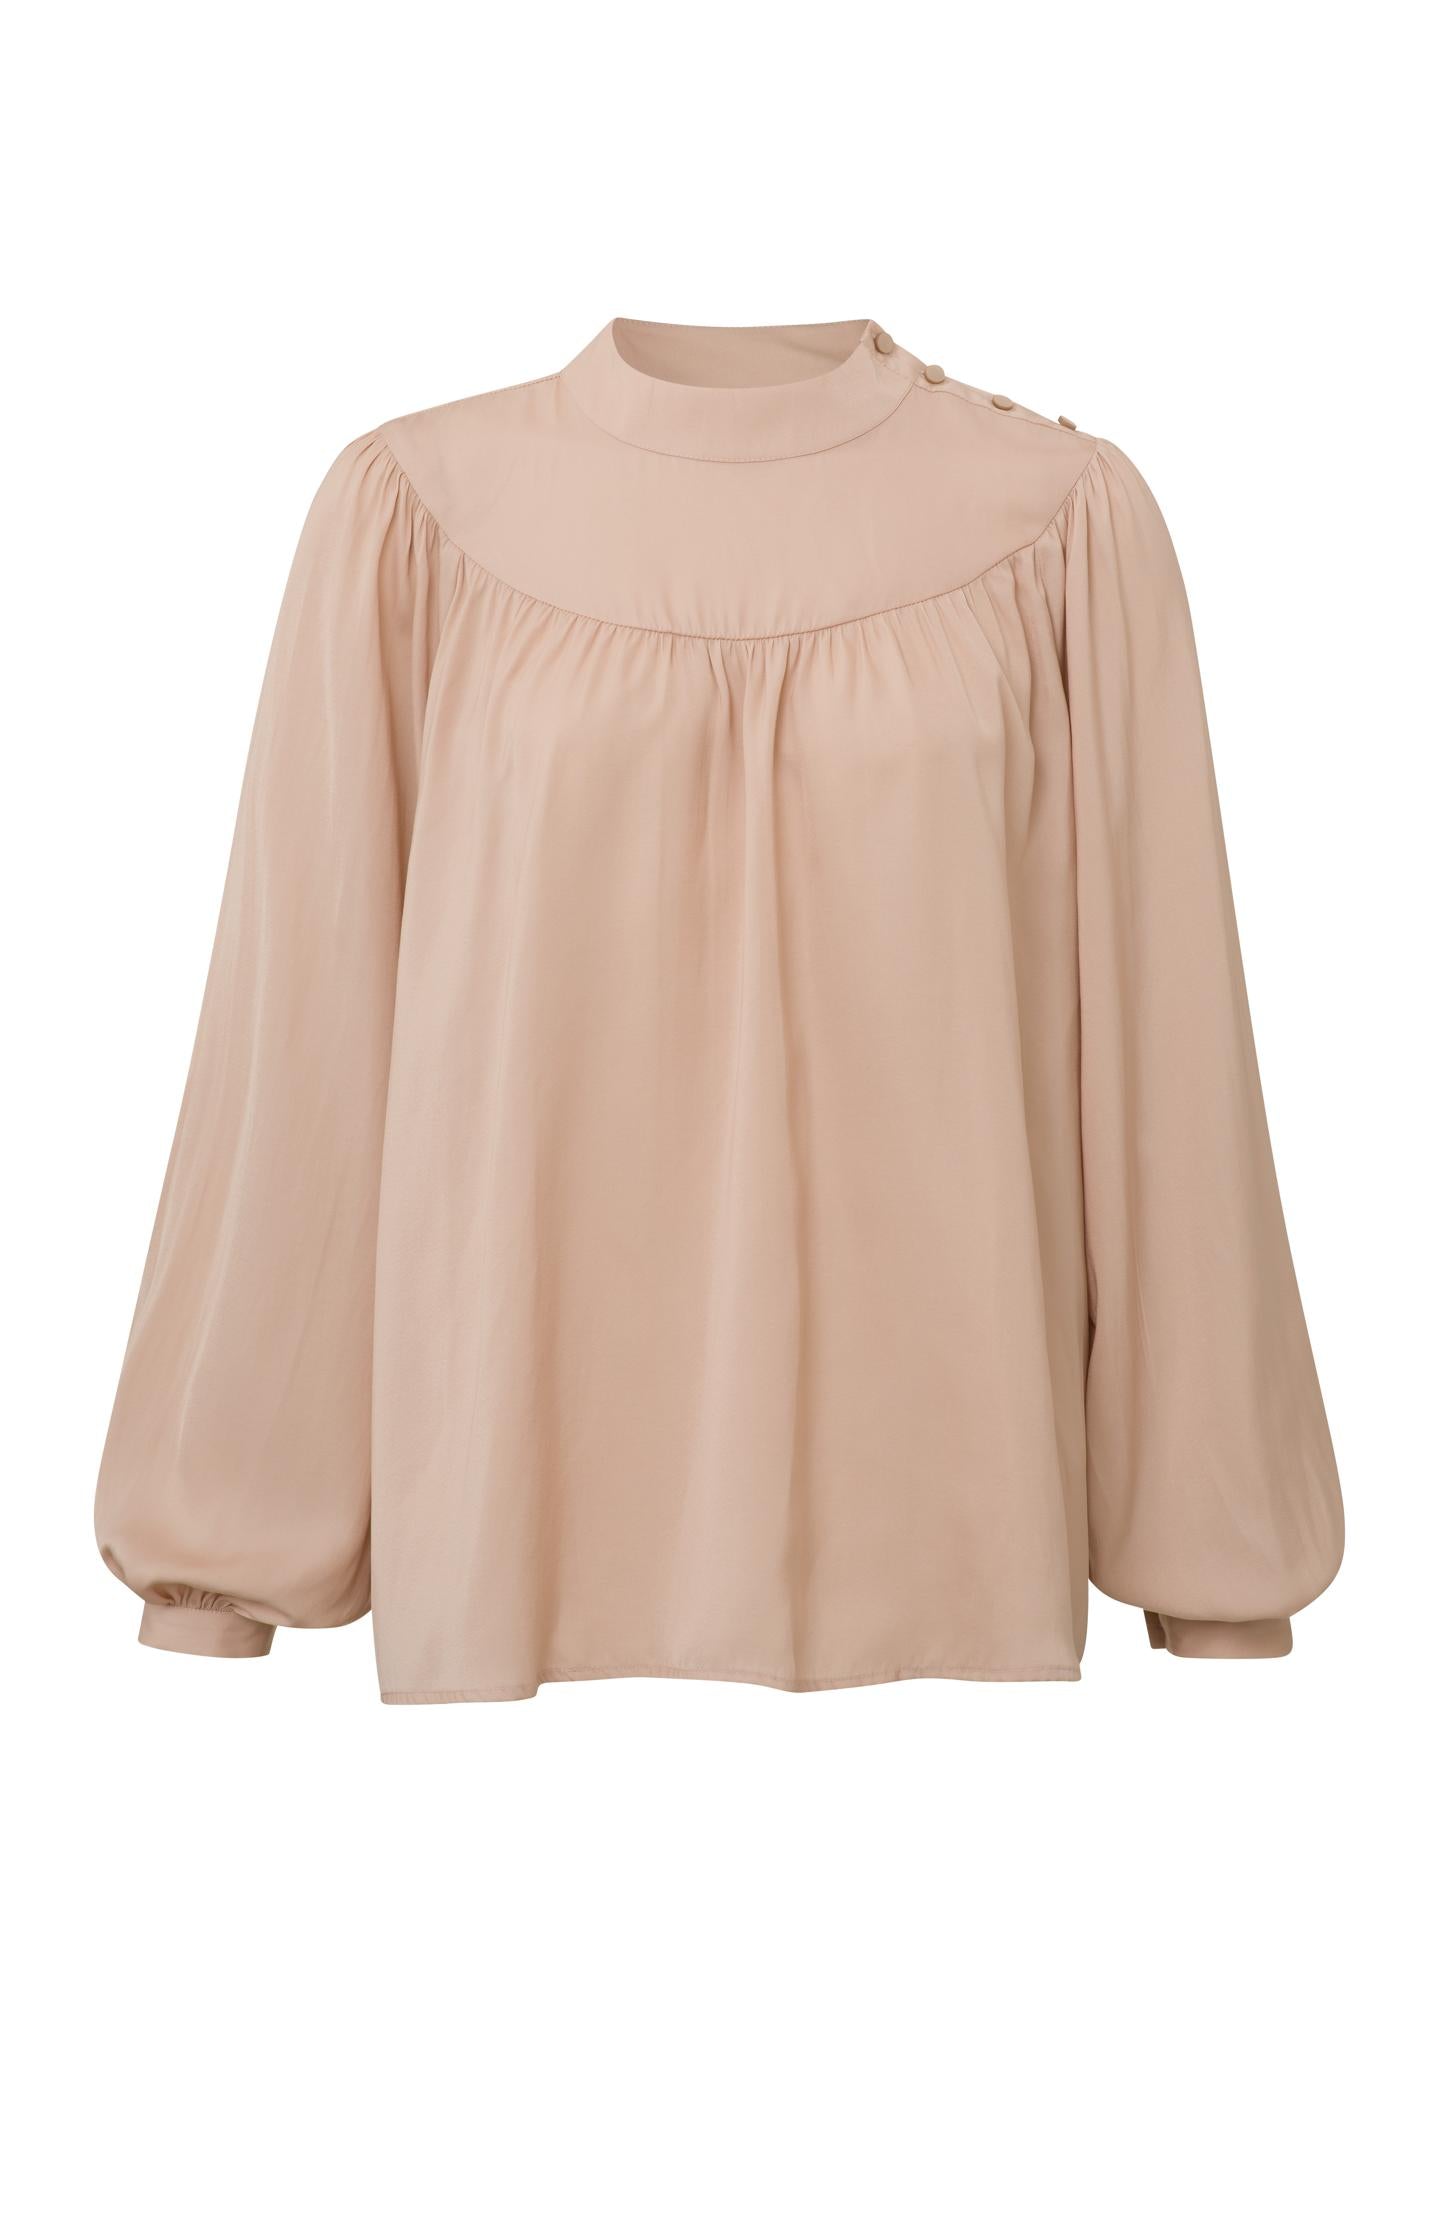 Top with high neck, long balloon sleeves and shoulder button - Type: product